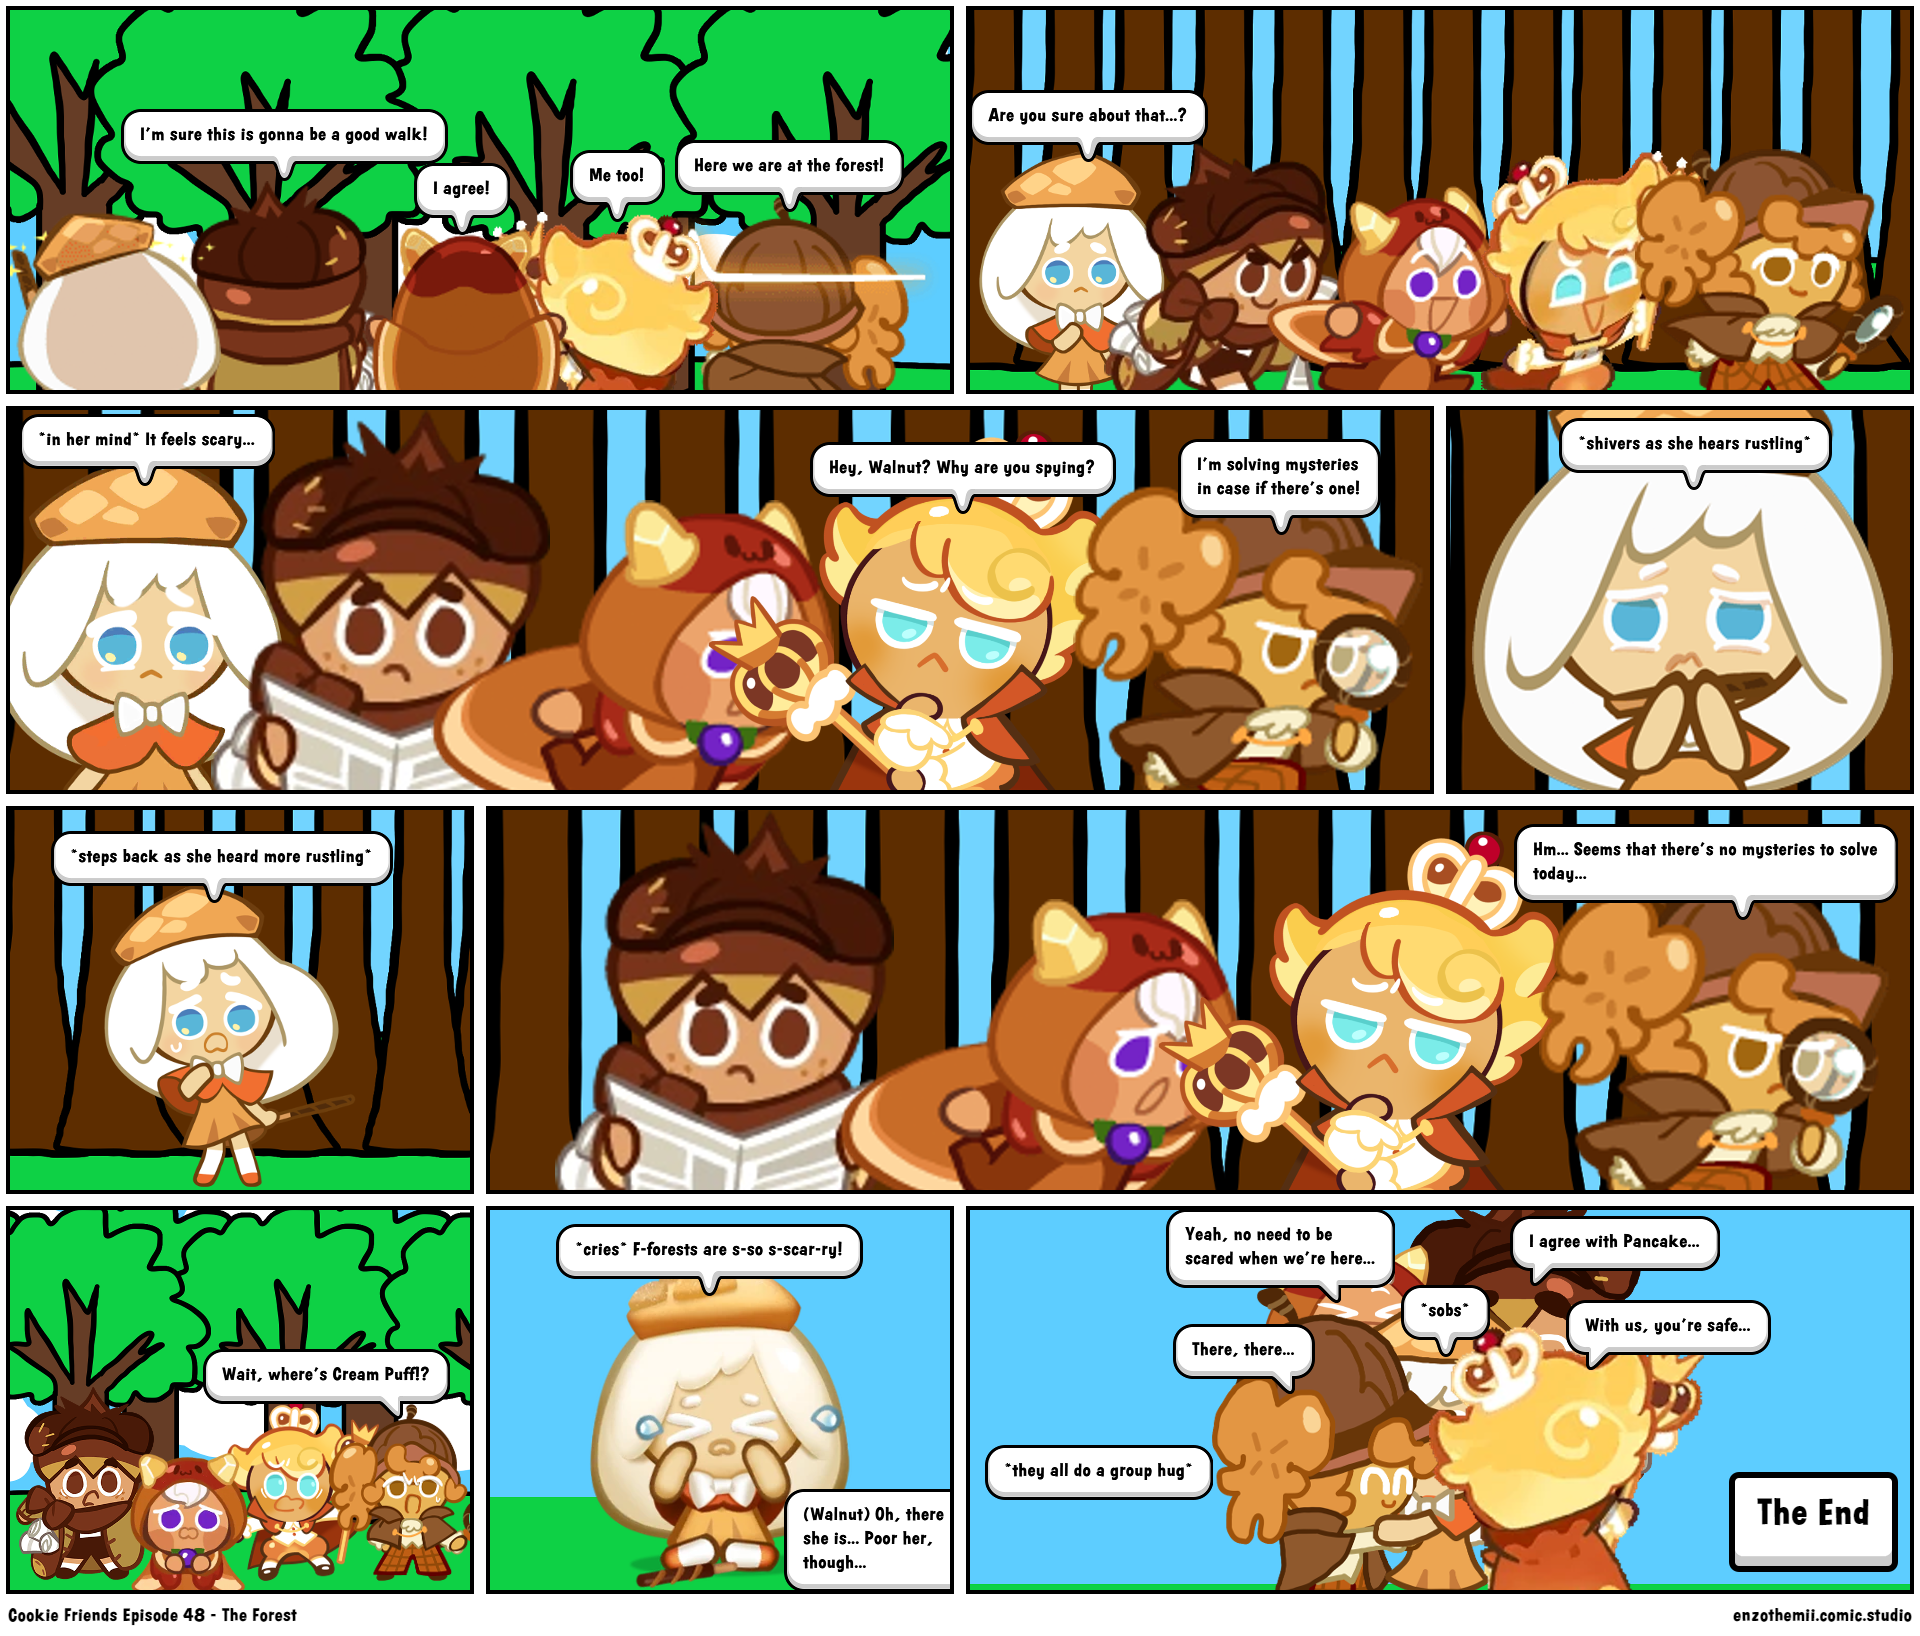 Cookie Friends Episode 48 - The Forest